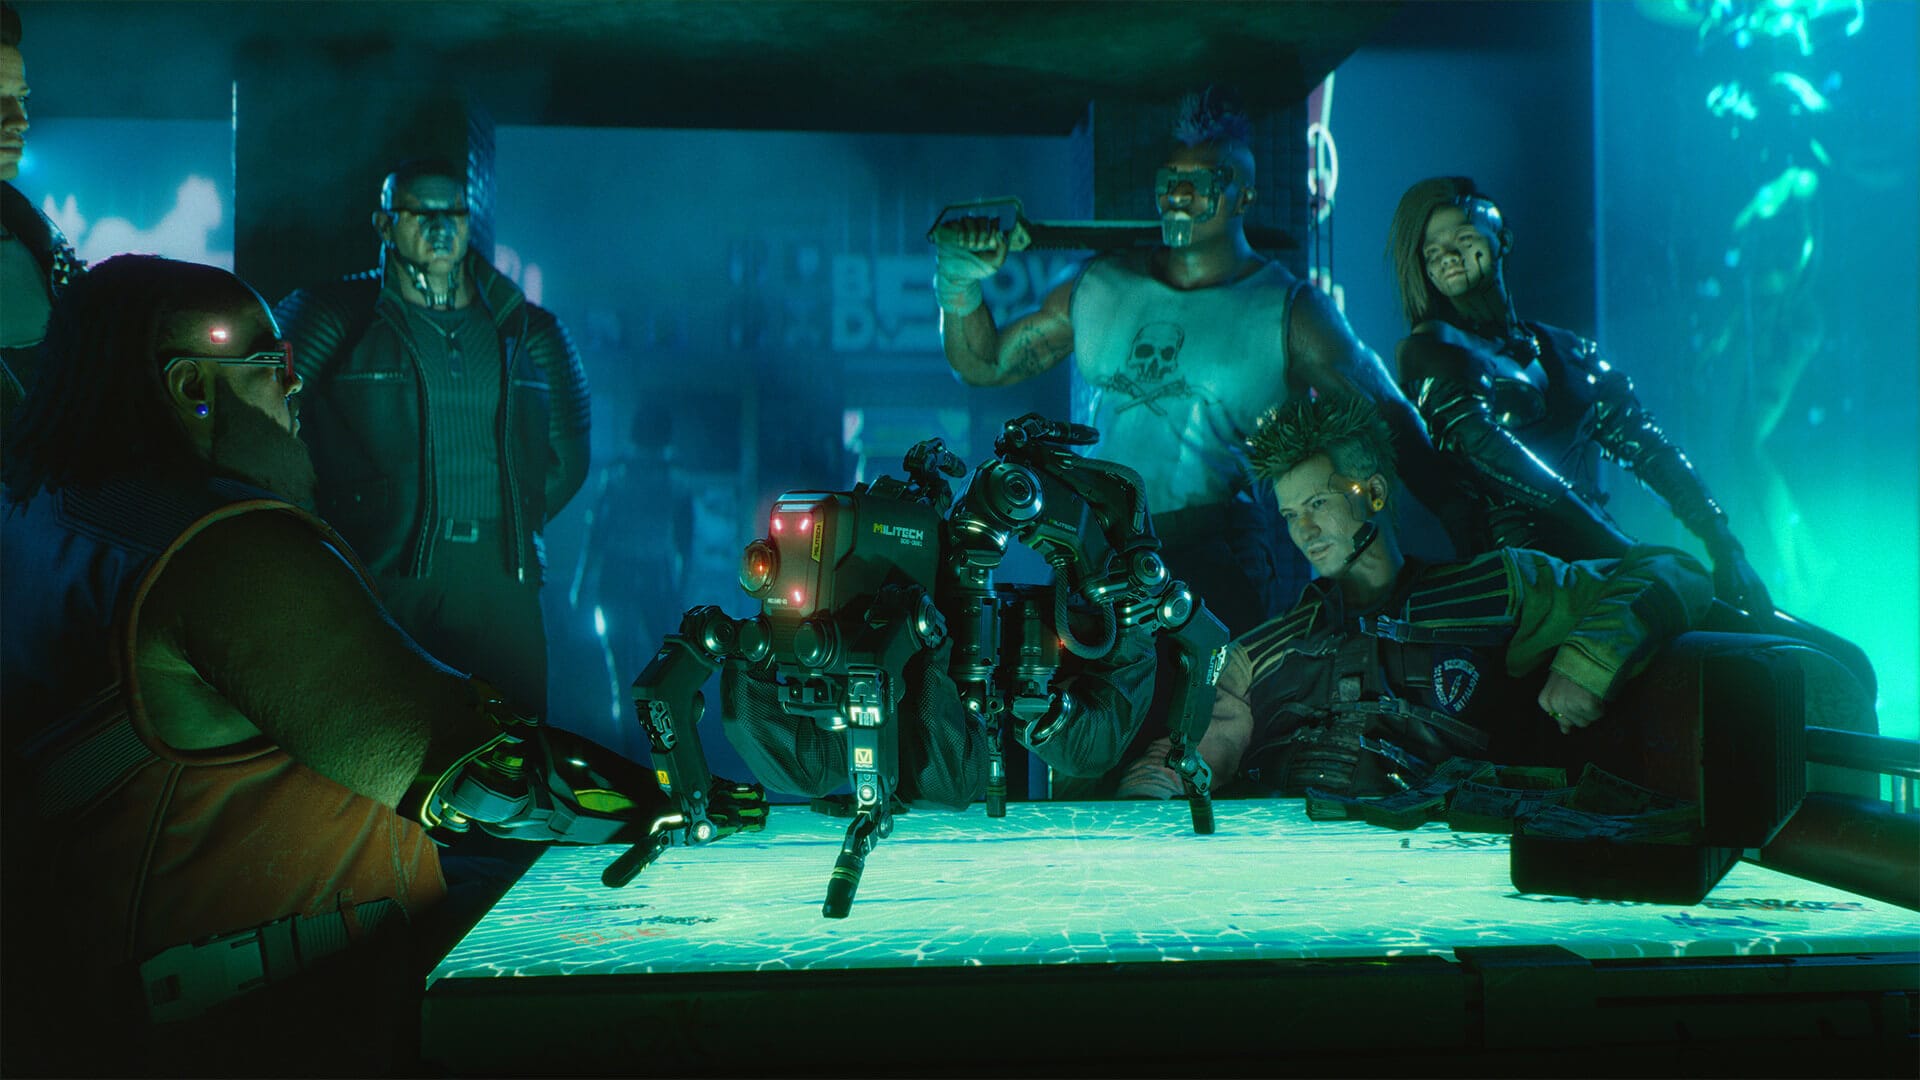 Dexter DeShawn and a gang gathered around some hardware in Cyberpunk 2077